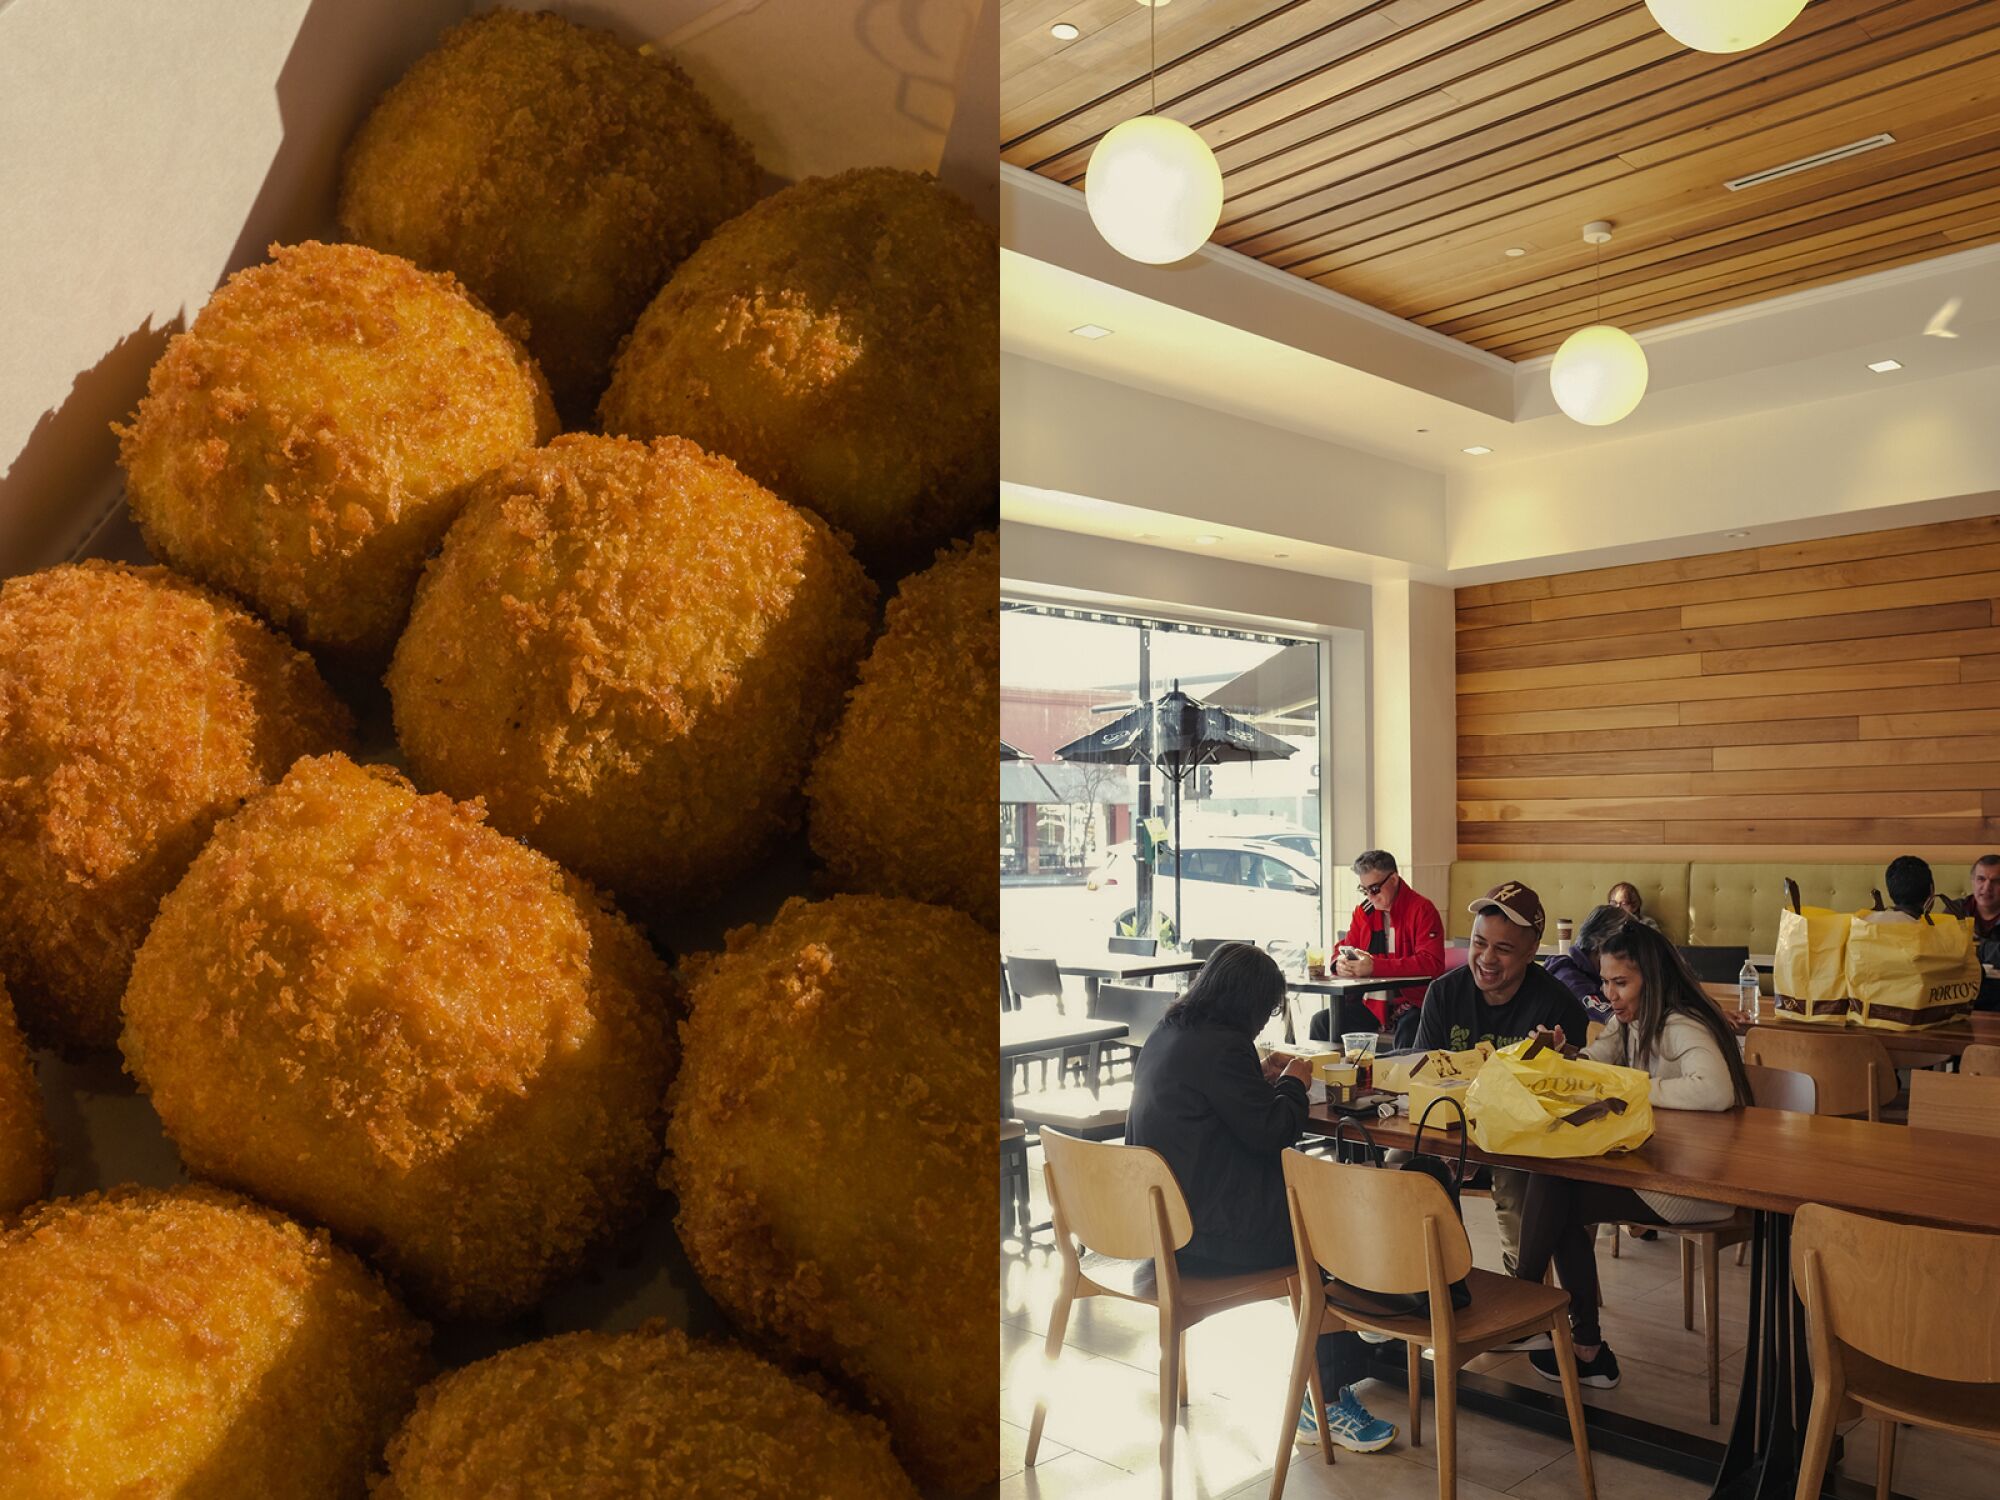 Rows of potato balls, left, and diners at Porto's Bakery, right.